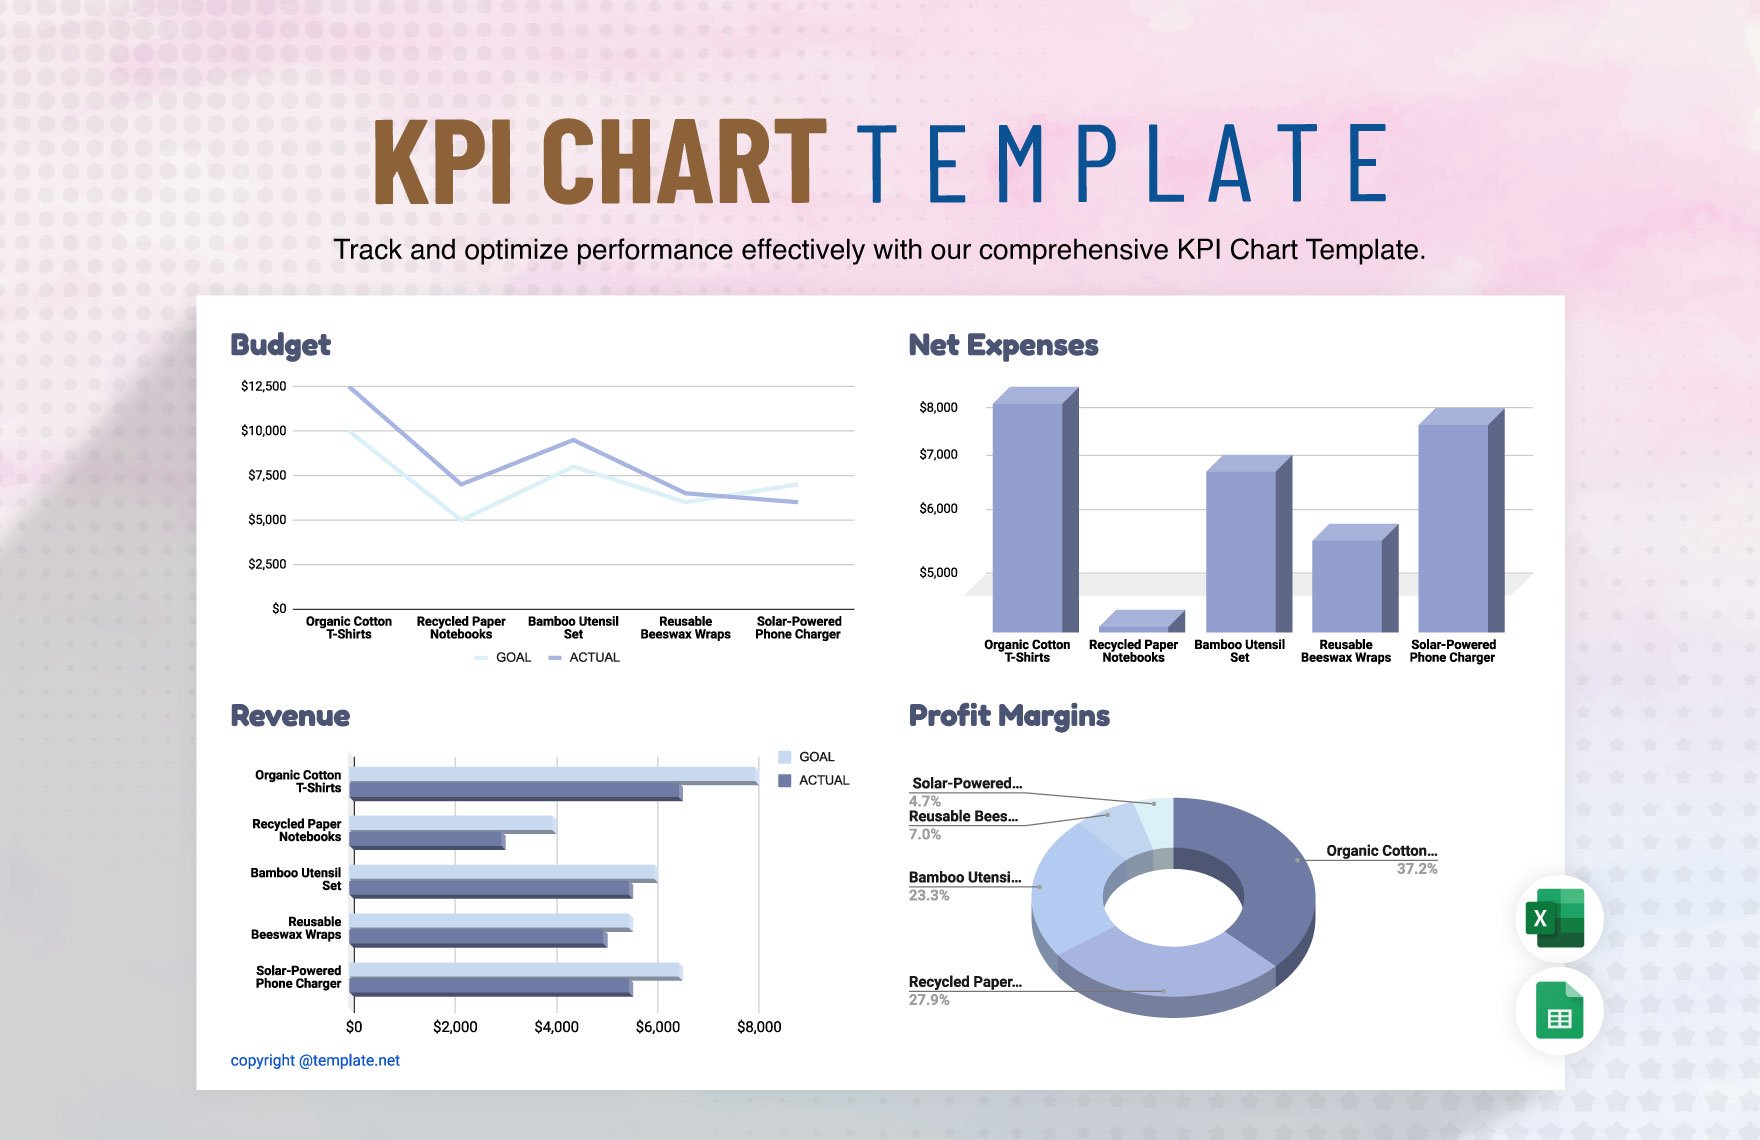 KPI Chart Template in Excel, Google Sheets